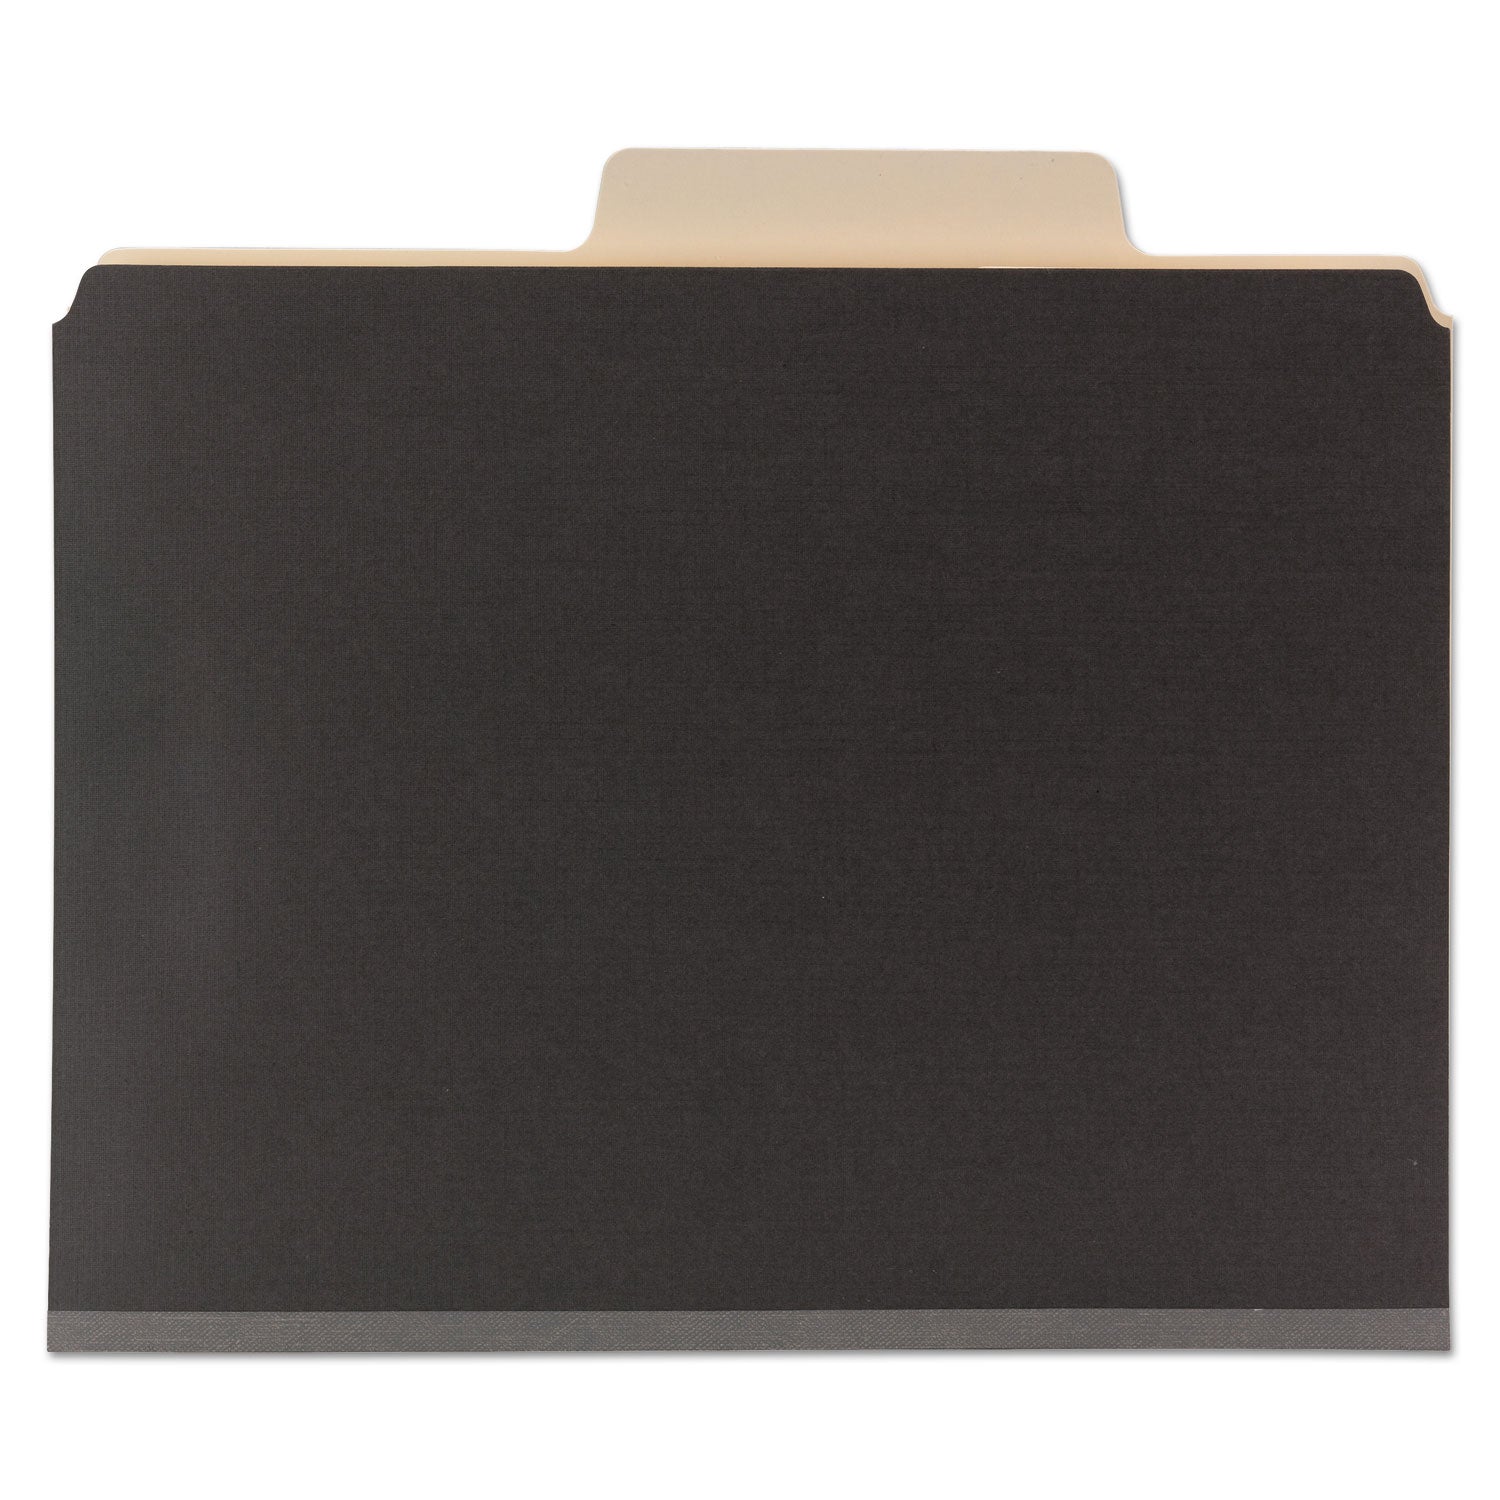 supertab-classification-folders-six-safeshield-fasteners-2-expansion-2-dividers-letter-size-dark-gray-10-box_smd14011 - 2